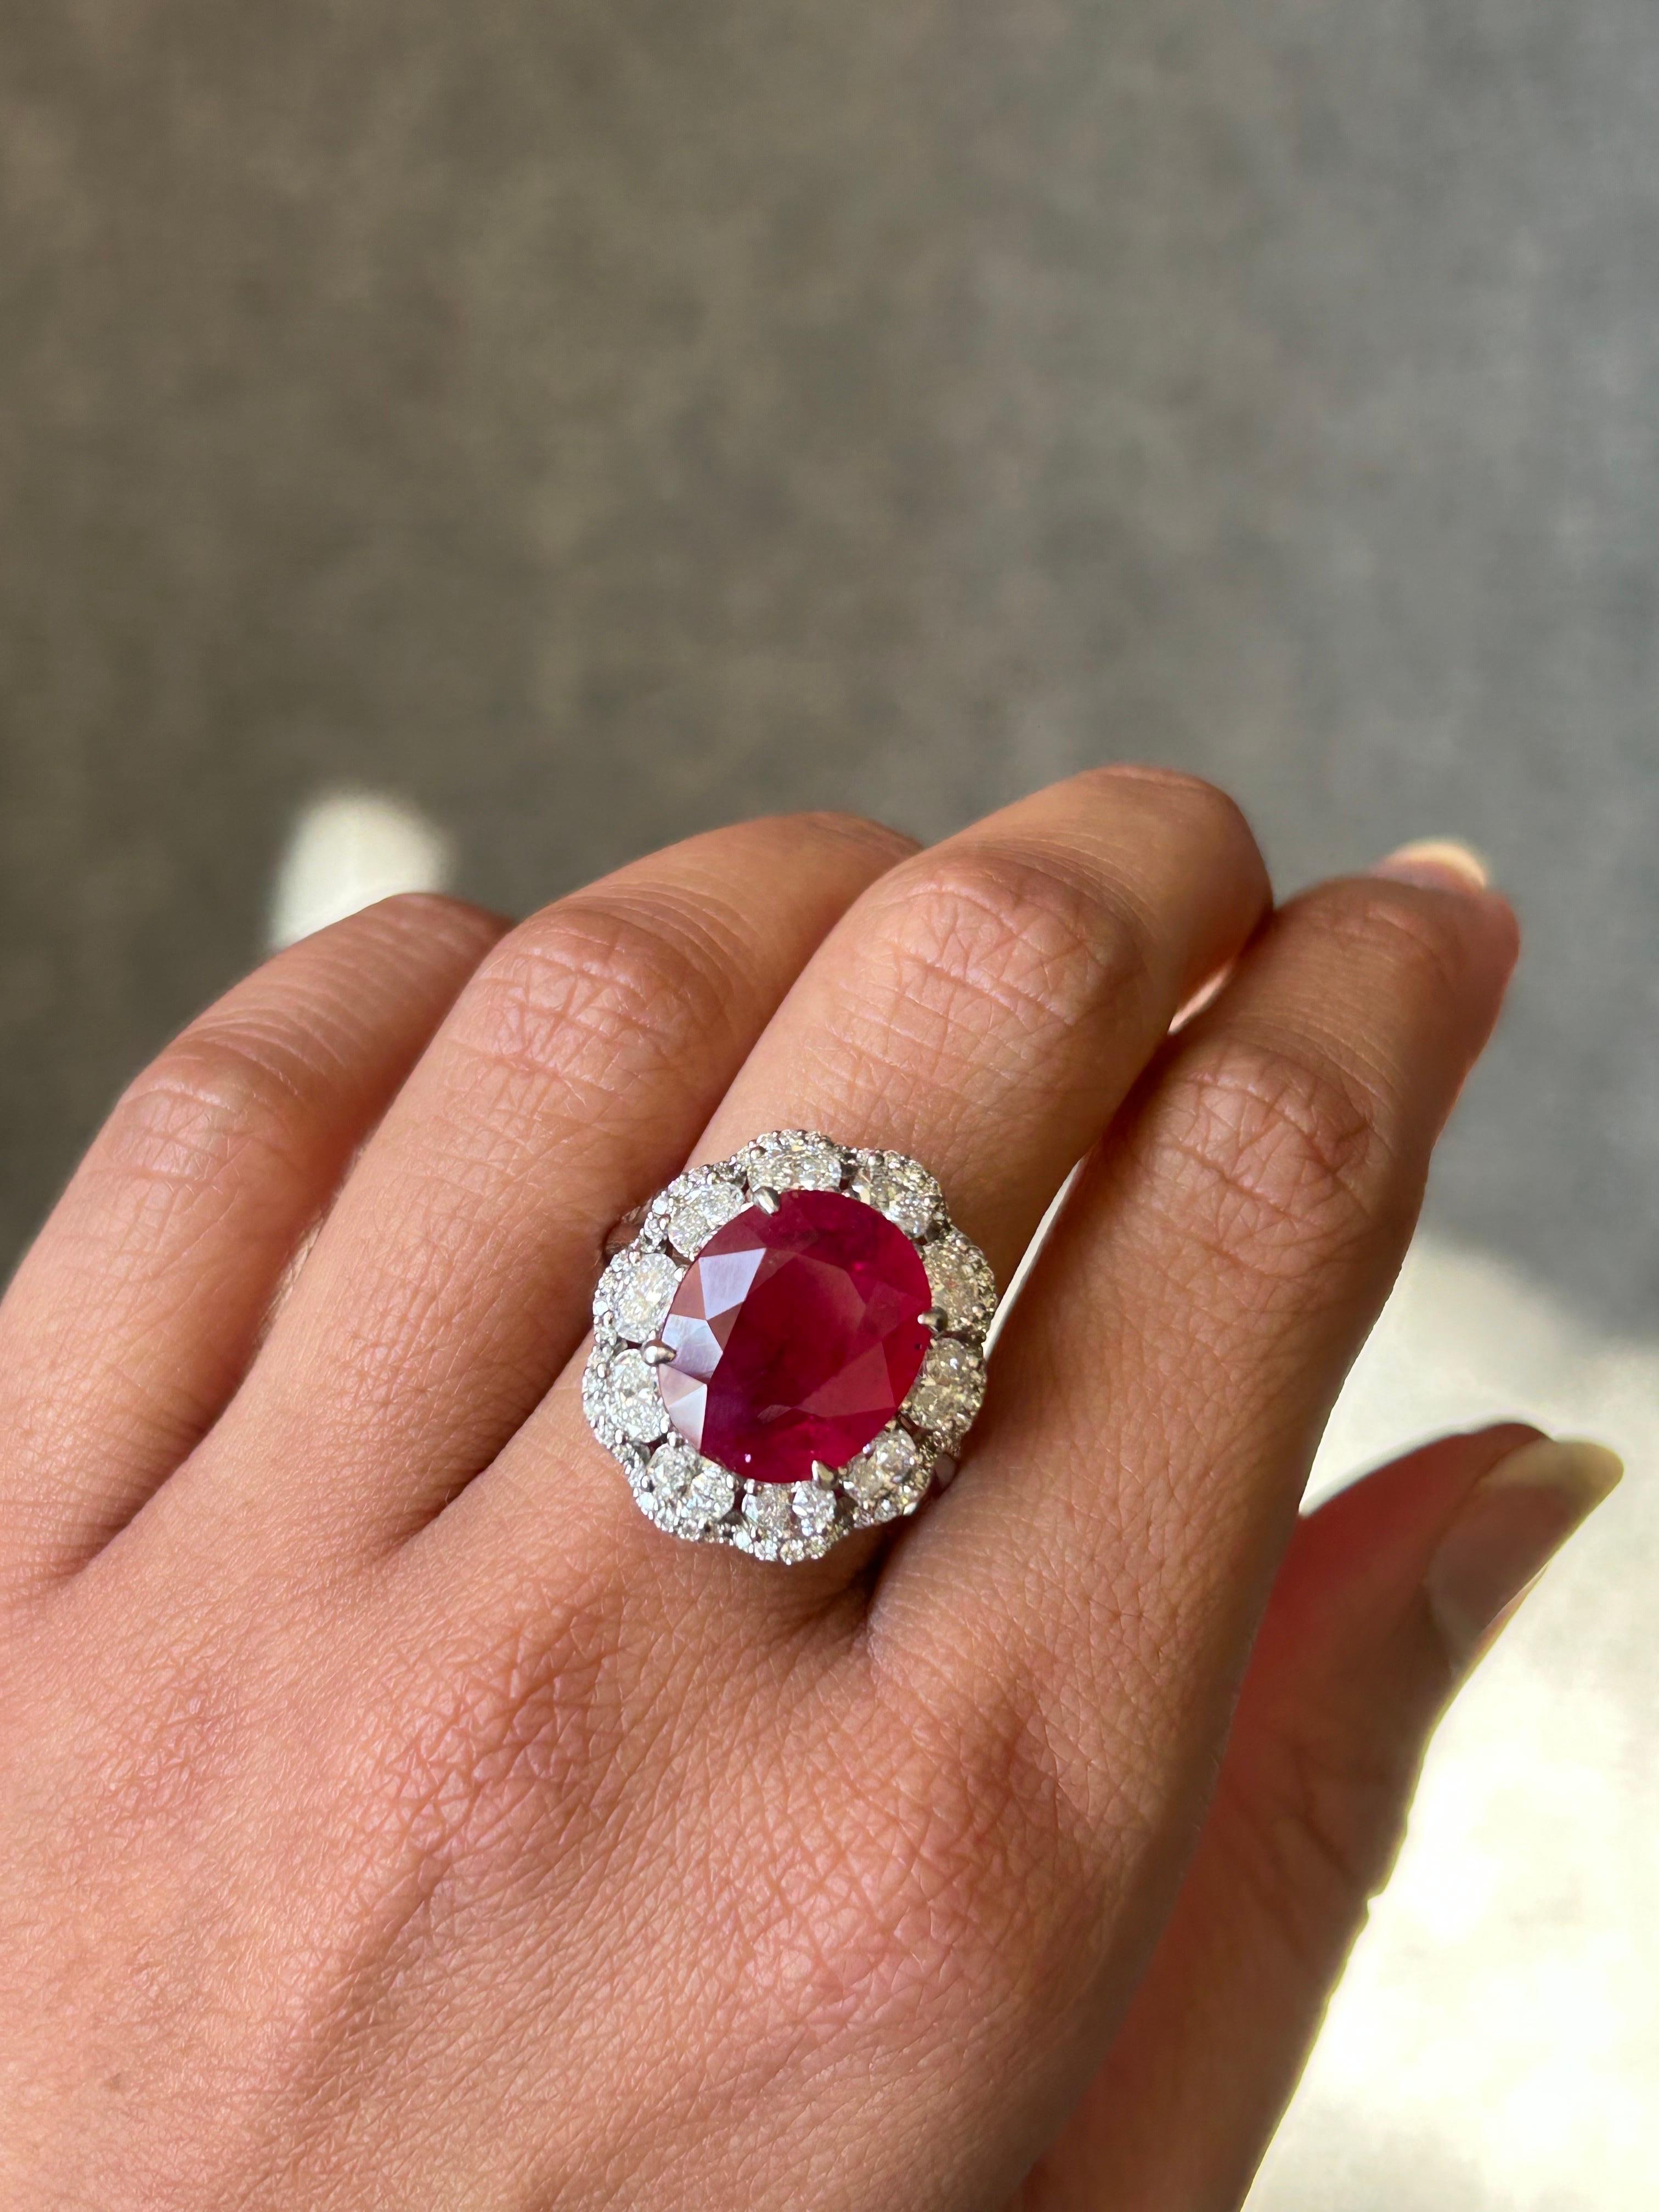 A stunning 7.25 carat certified natural, Burma Ruby, vivid red color and transparent. The center piece is adorned with 1.55 carat oval shaped diamonds and 0.30 carat brilliant cut diamonds, VS quality, G color. The ring is currently sized at US 7,